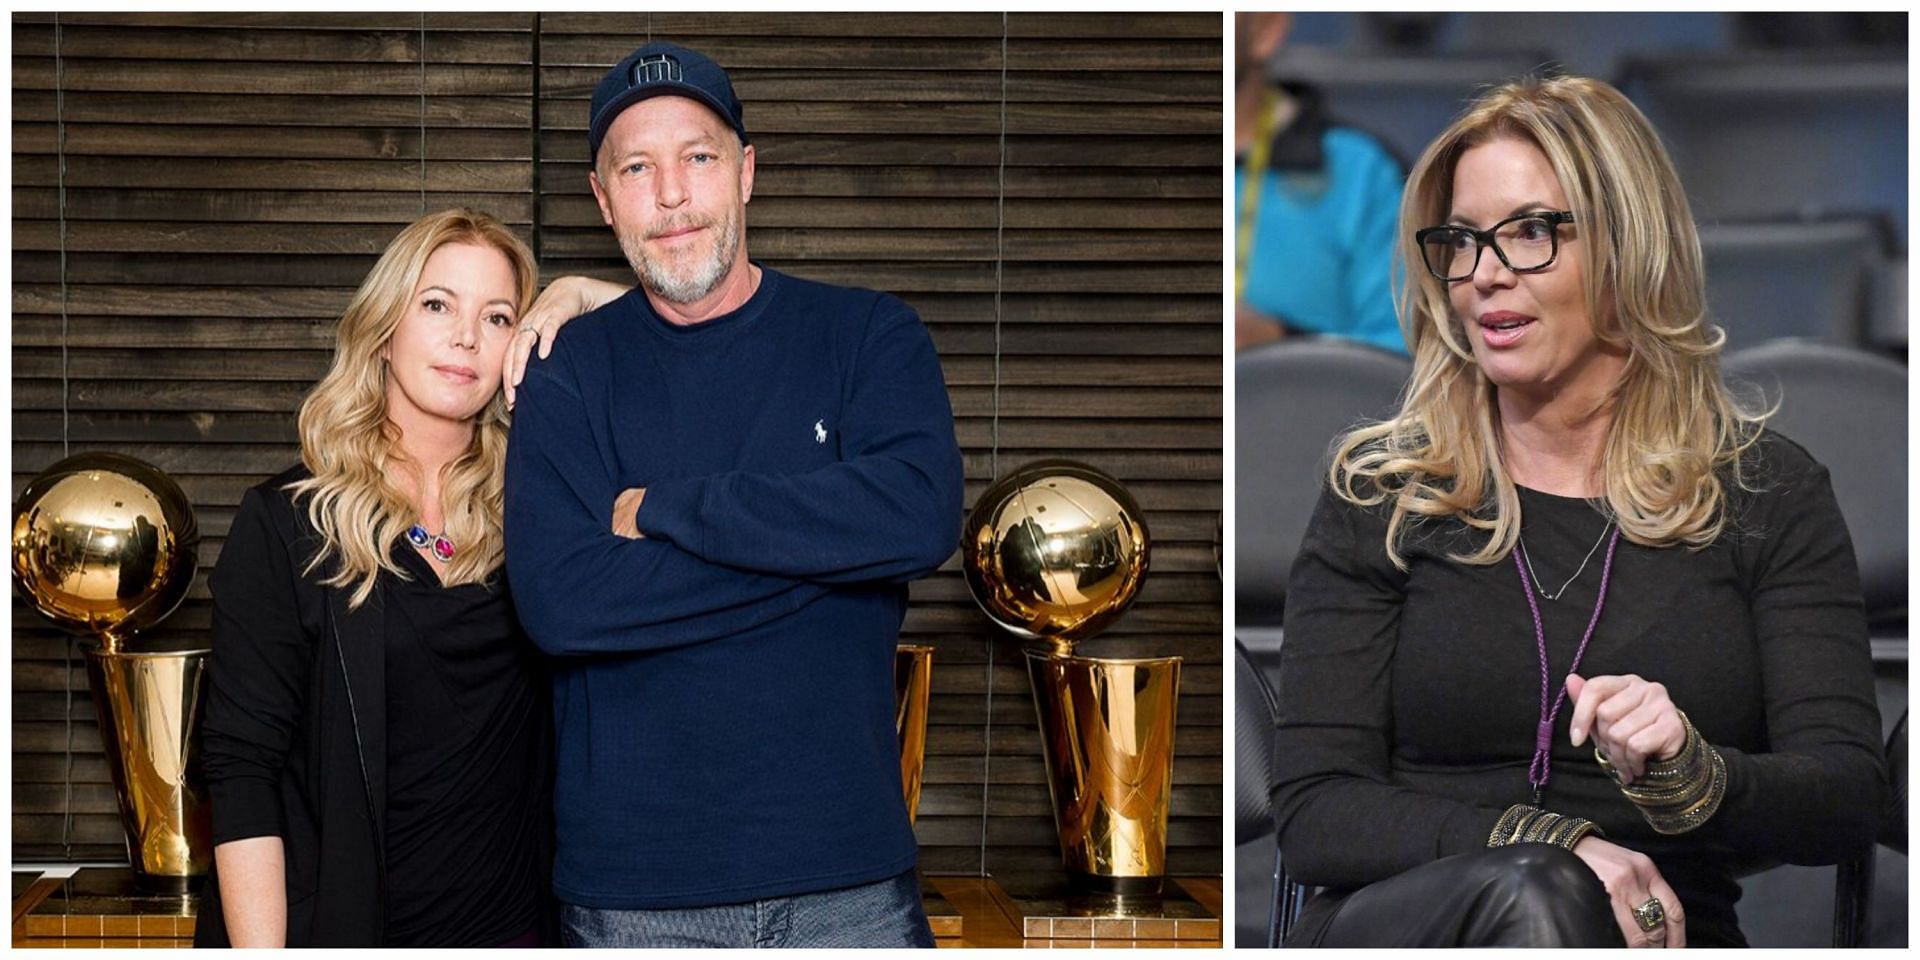 Jeanie Buss shockingly reveals NBA owner allegedly harassing her in 1995